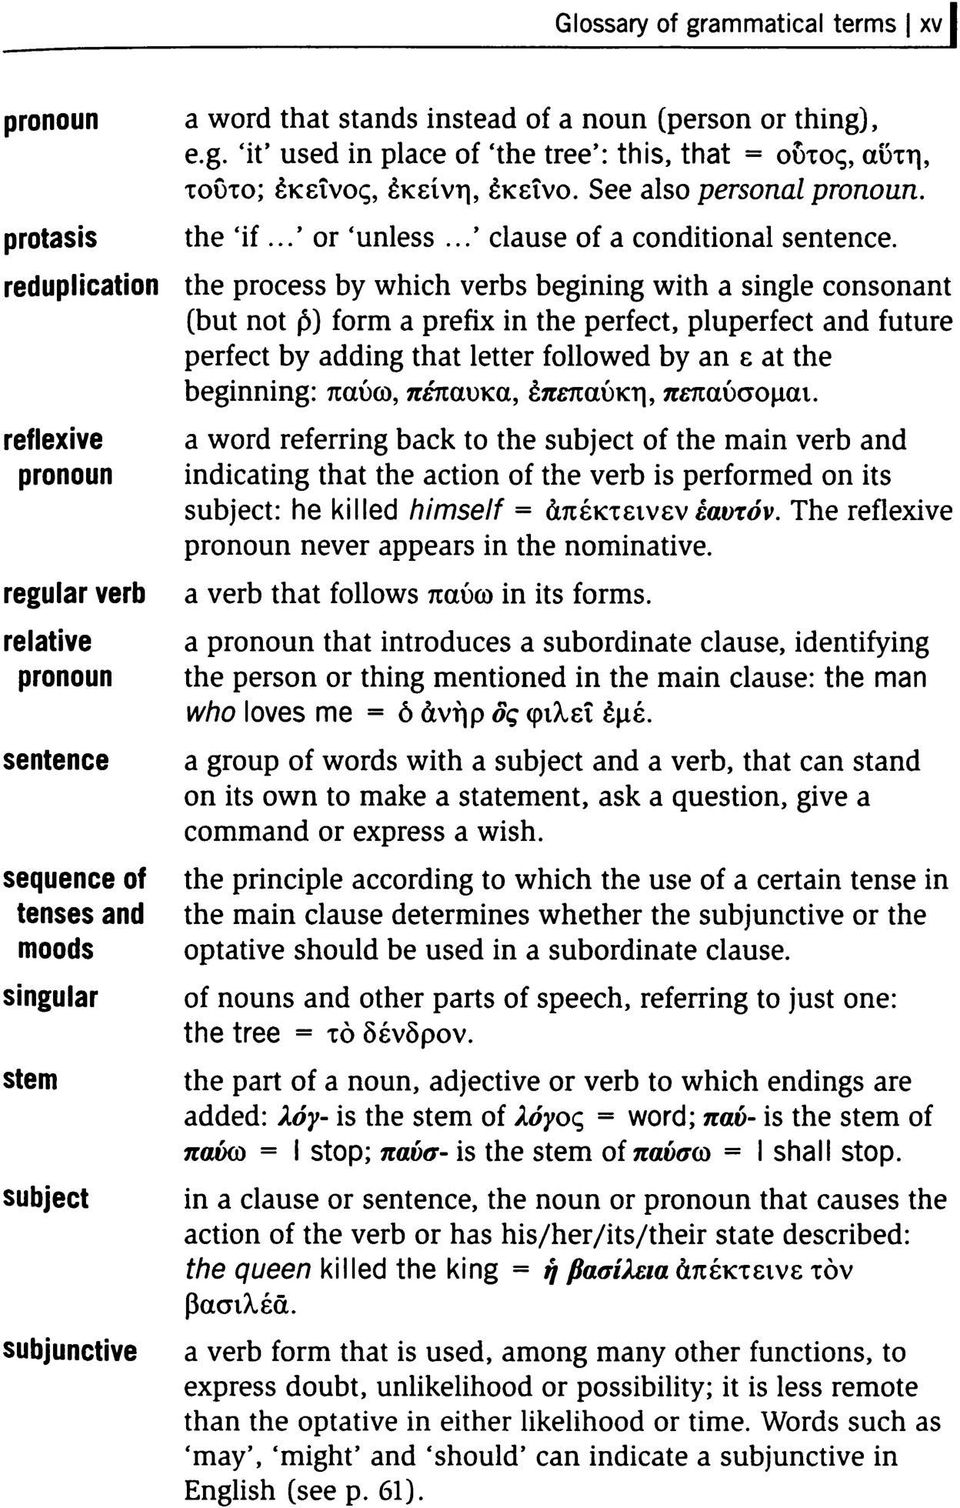 reduplication the process by which verbs begining with a single consonant (but not β) form a prefix in the perfect, pluperfect and future perfect by adding that letter followed by an ε at the